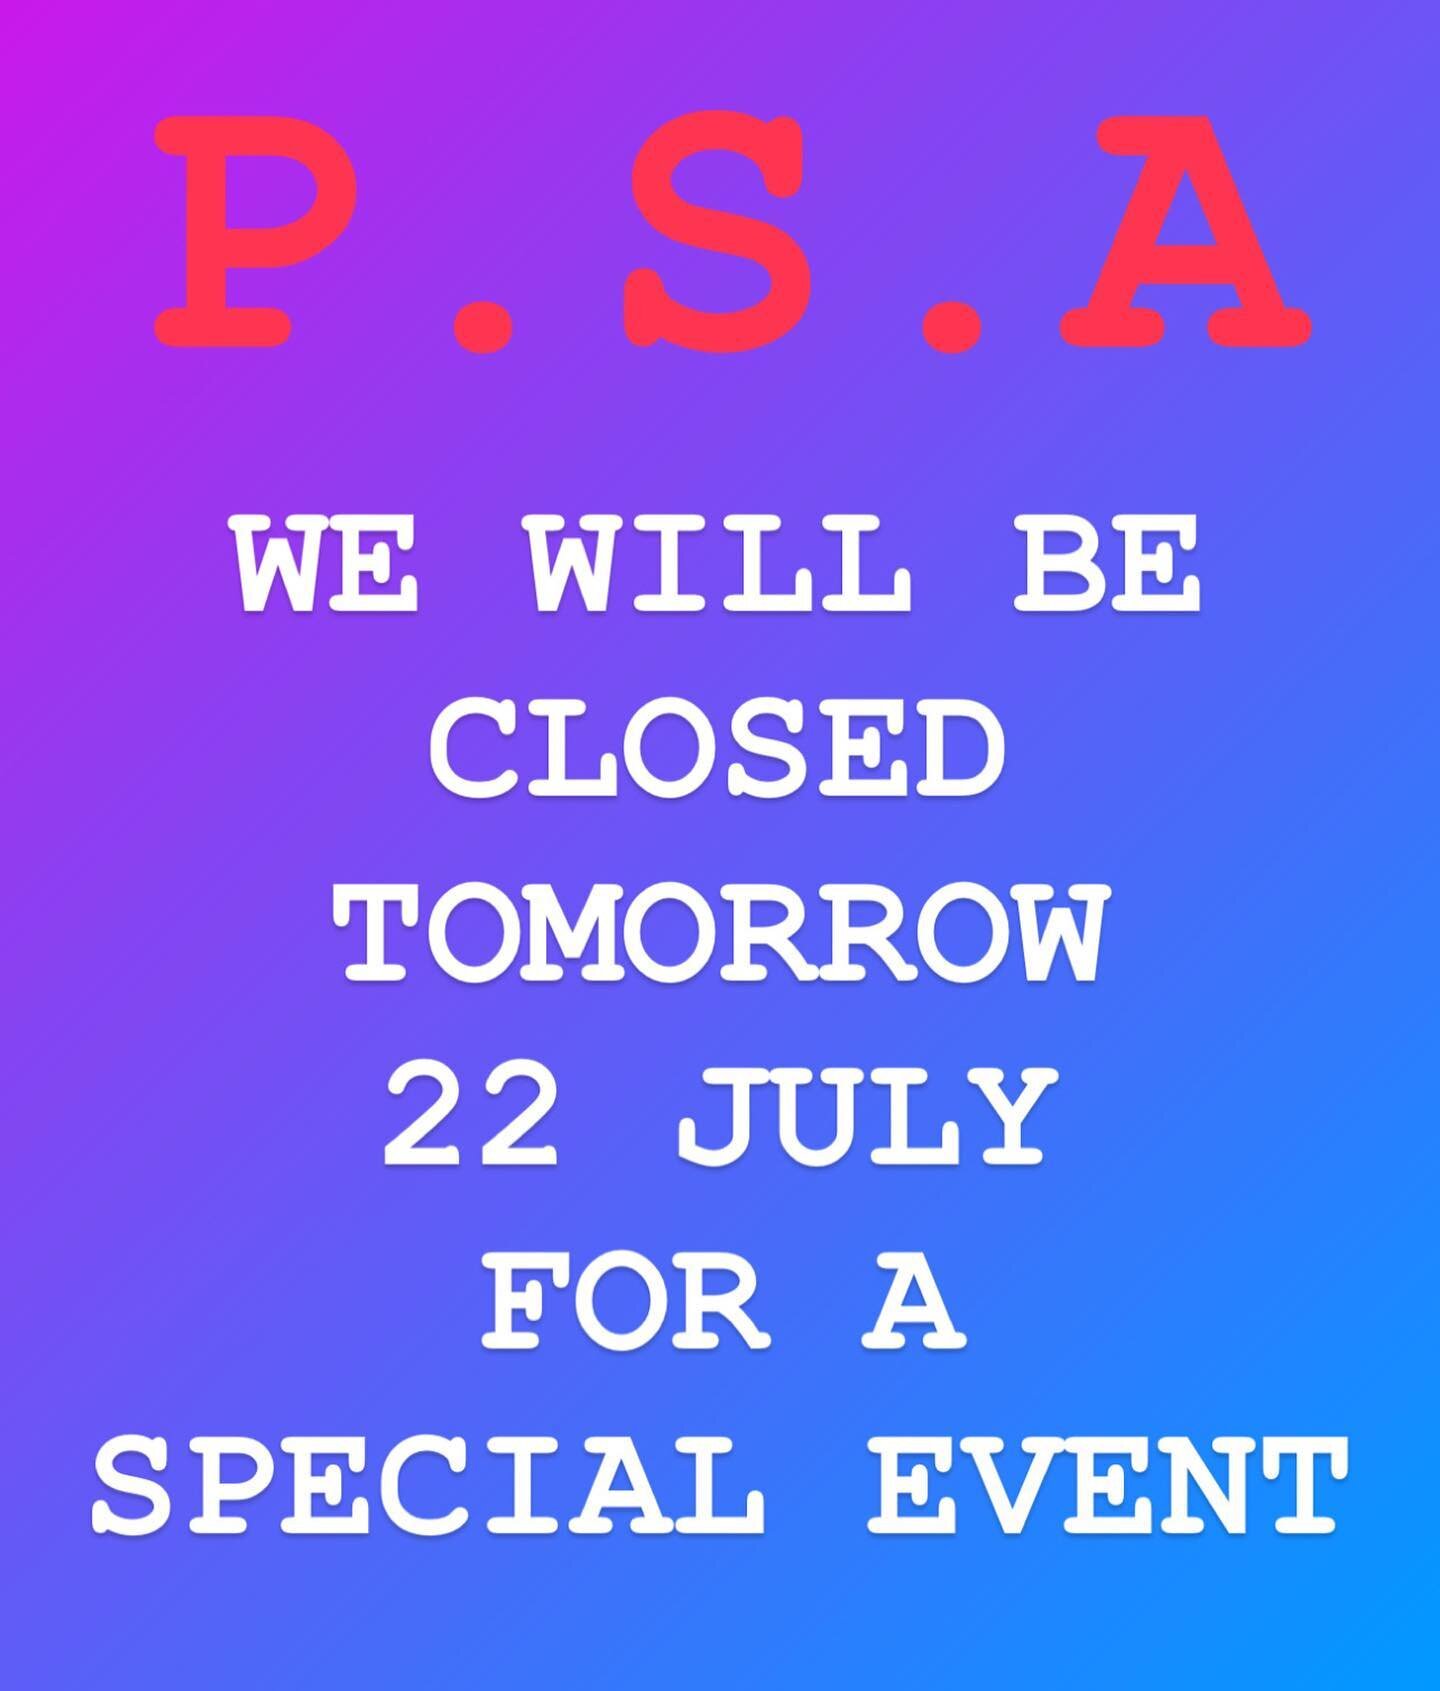 Hey fam and friends! We will be closed all day tomorrow for a special event! We will be back again bright and early Friday morning! Have a fab day!